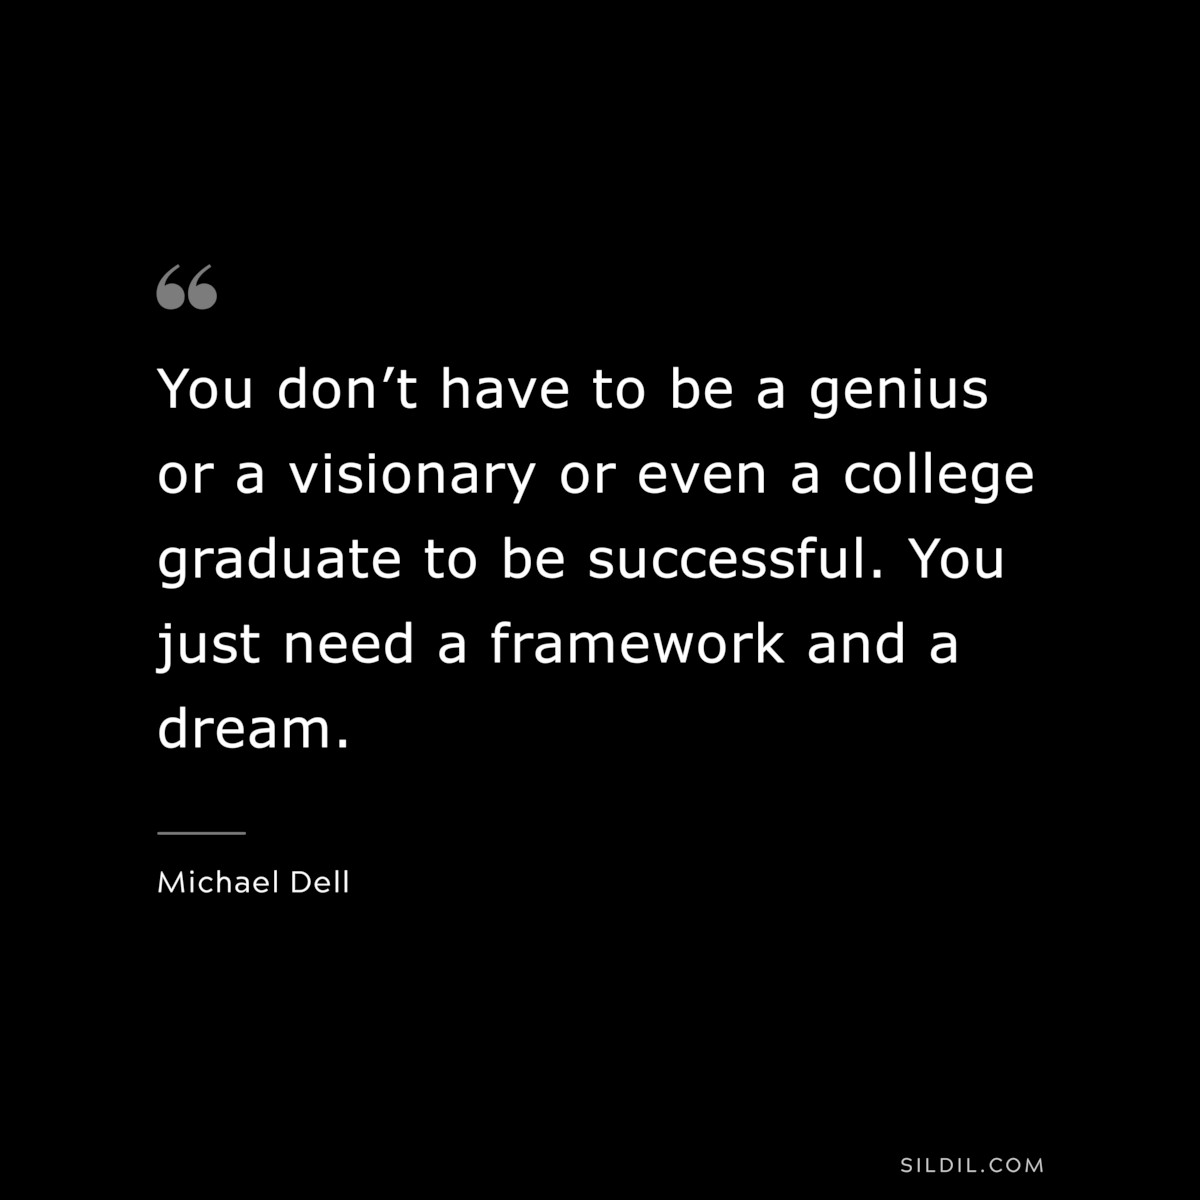 You don’t have to be a genius or a visionary or even a college graduate to be successful. You just need a framework and a dream. ― Michael Dell